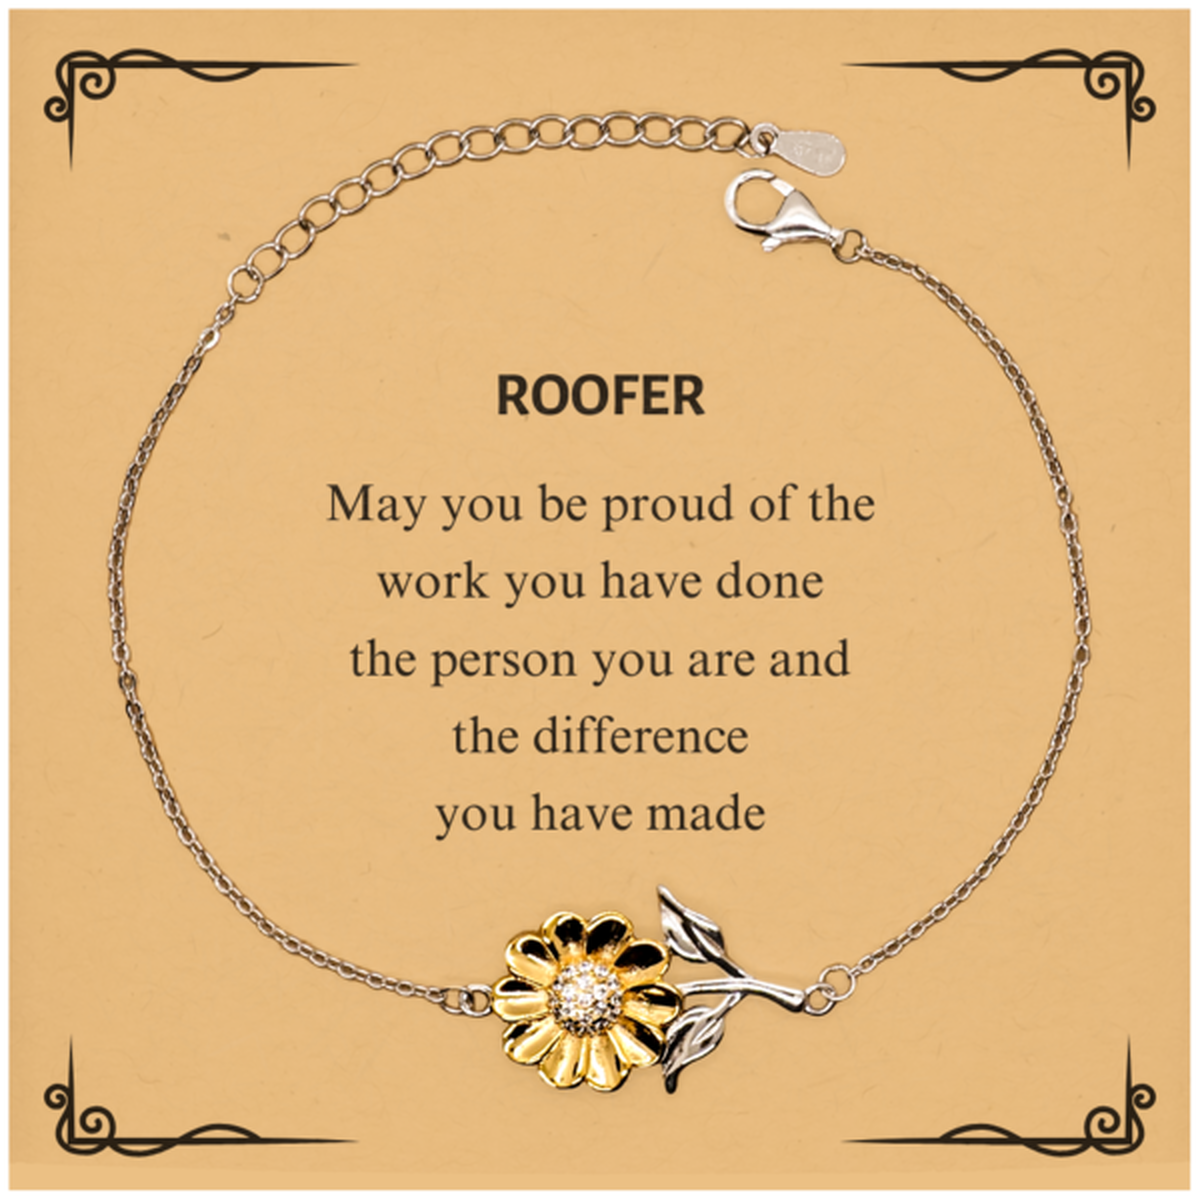 Roofer May you be proud of the work you have done, Retirement Roofer Sunflower Bracelet for Colleague Appreciation Gifts Amazing for Roofer